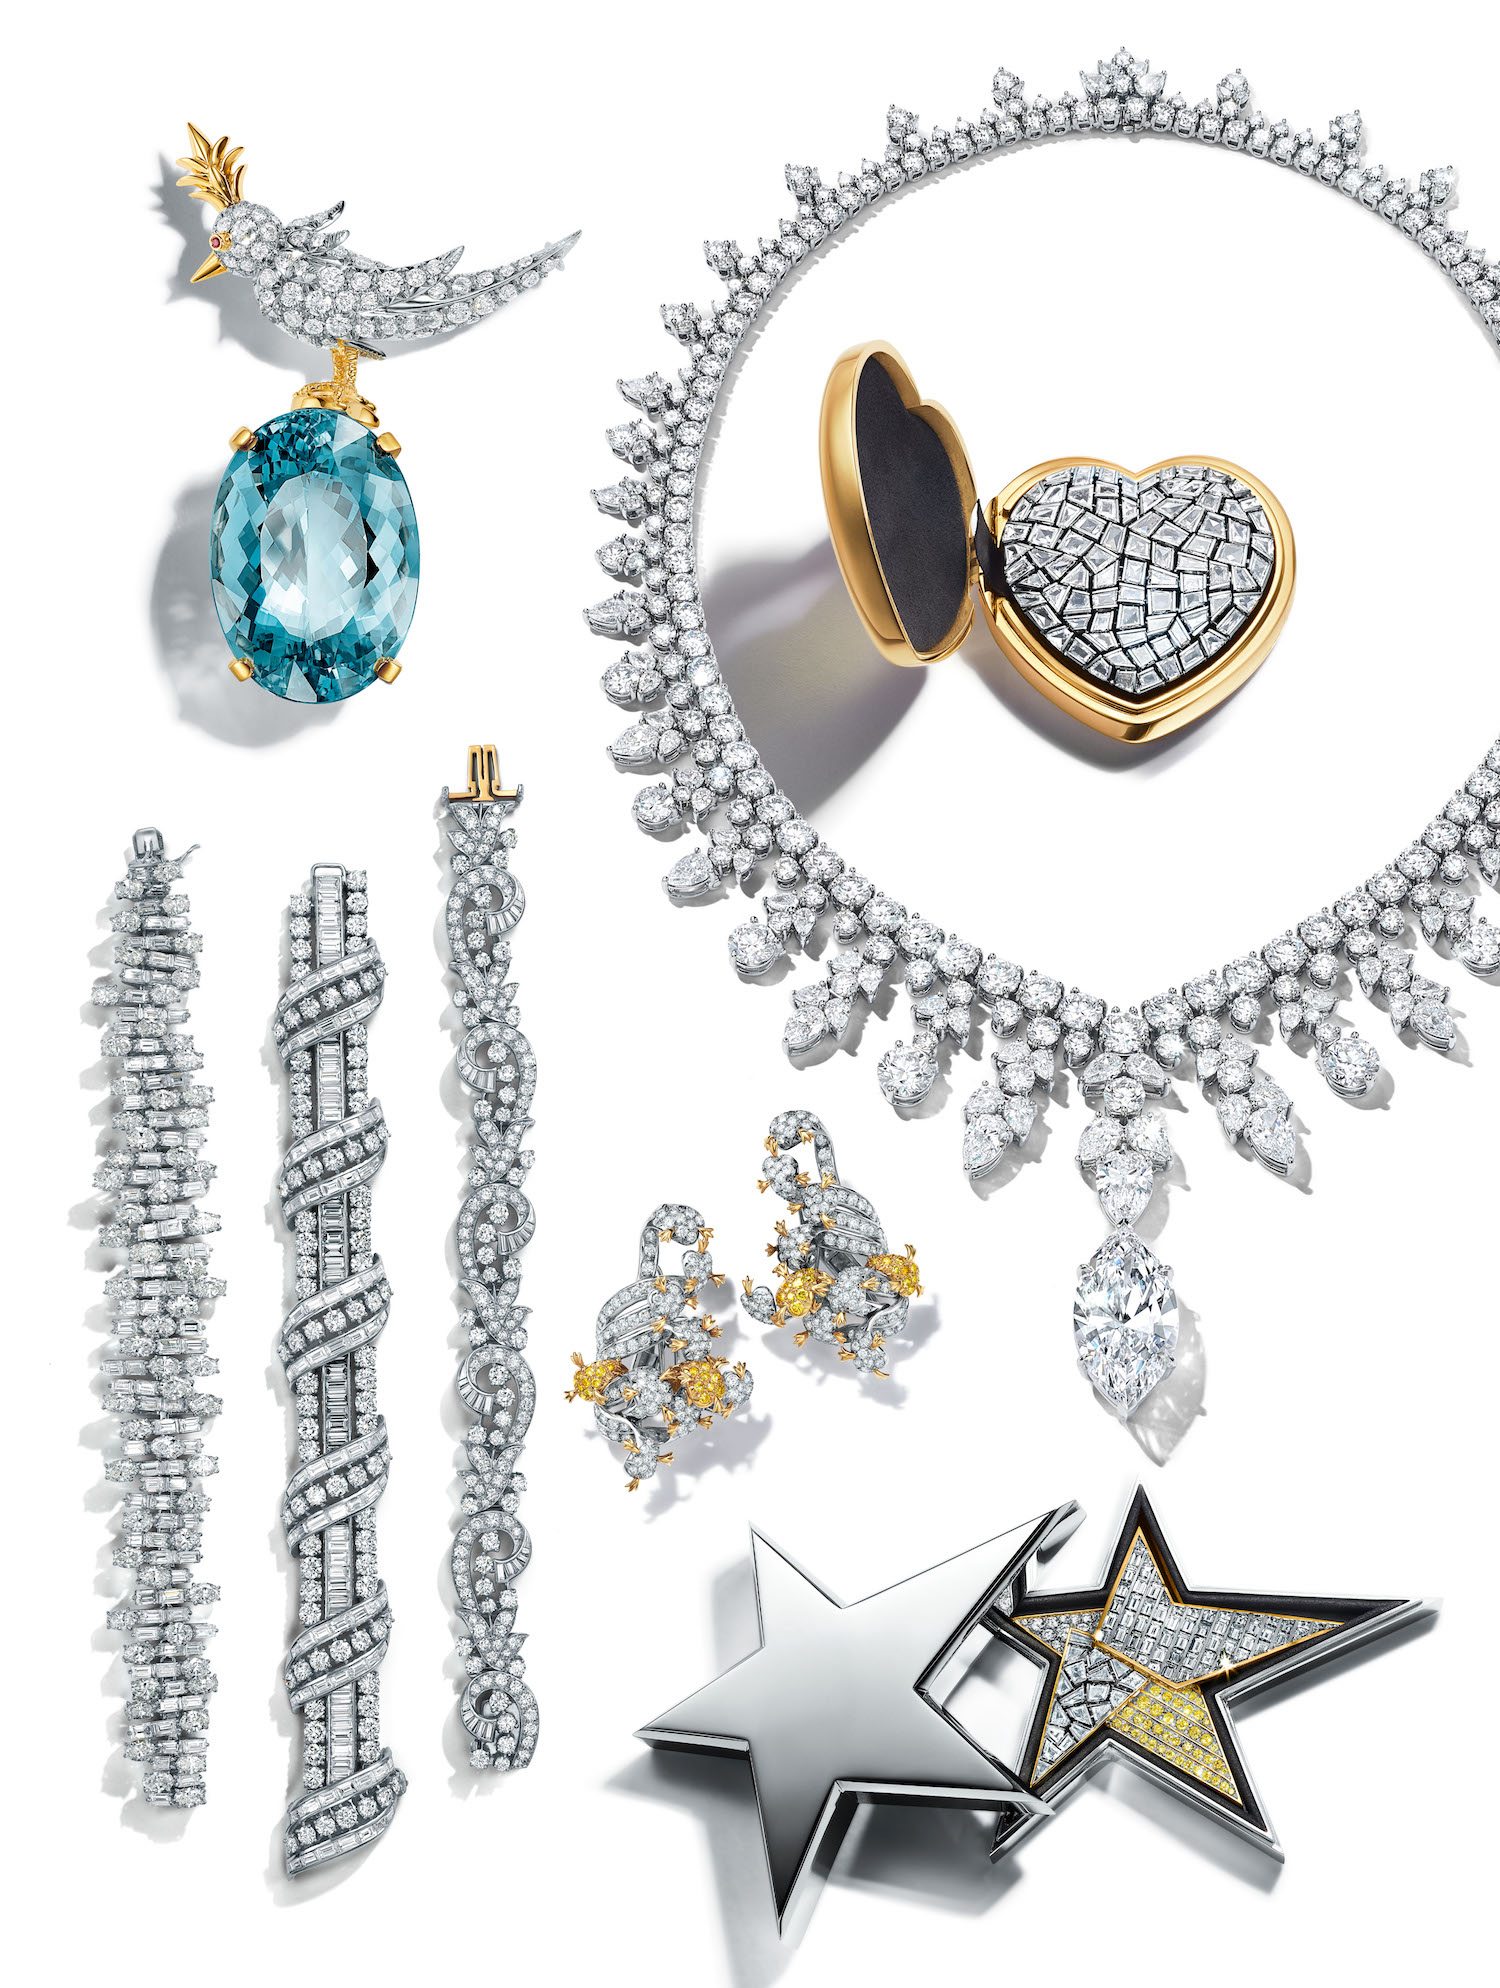 Some of the Tiffany and Co collections on display at Visions and Virtuosity in Shanghai